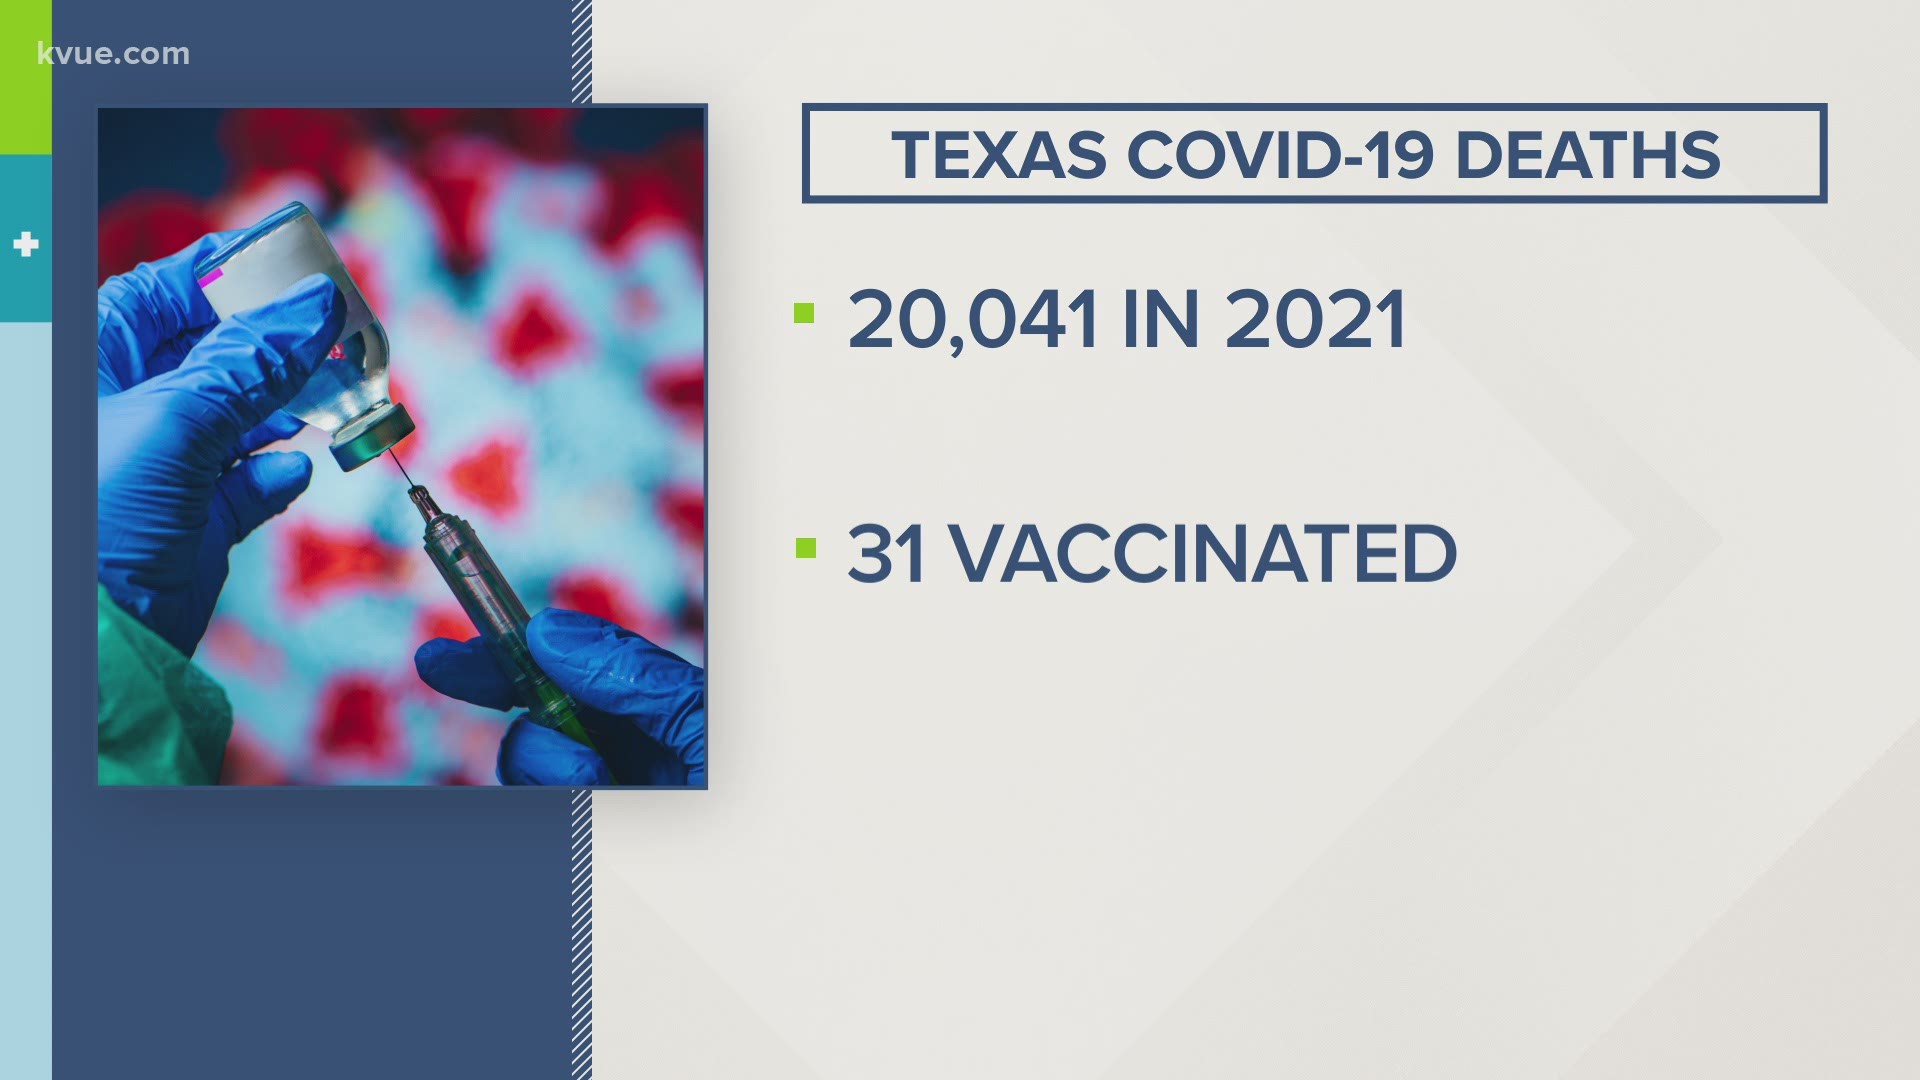 Over 10,000 people have died from the virus in Texas in 2021. The coronavirus vaccine became available to all adults in Texas on March 29.